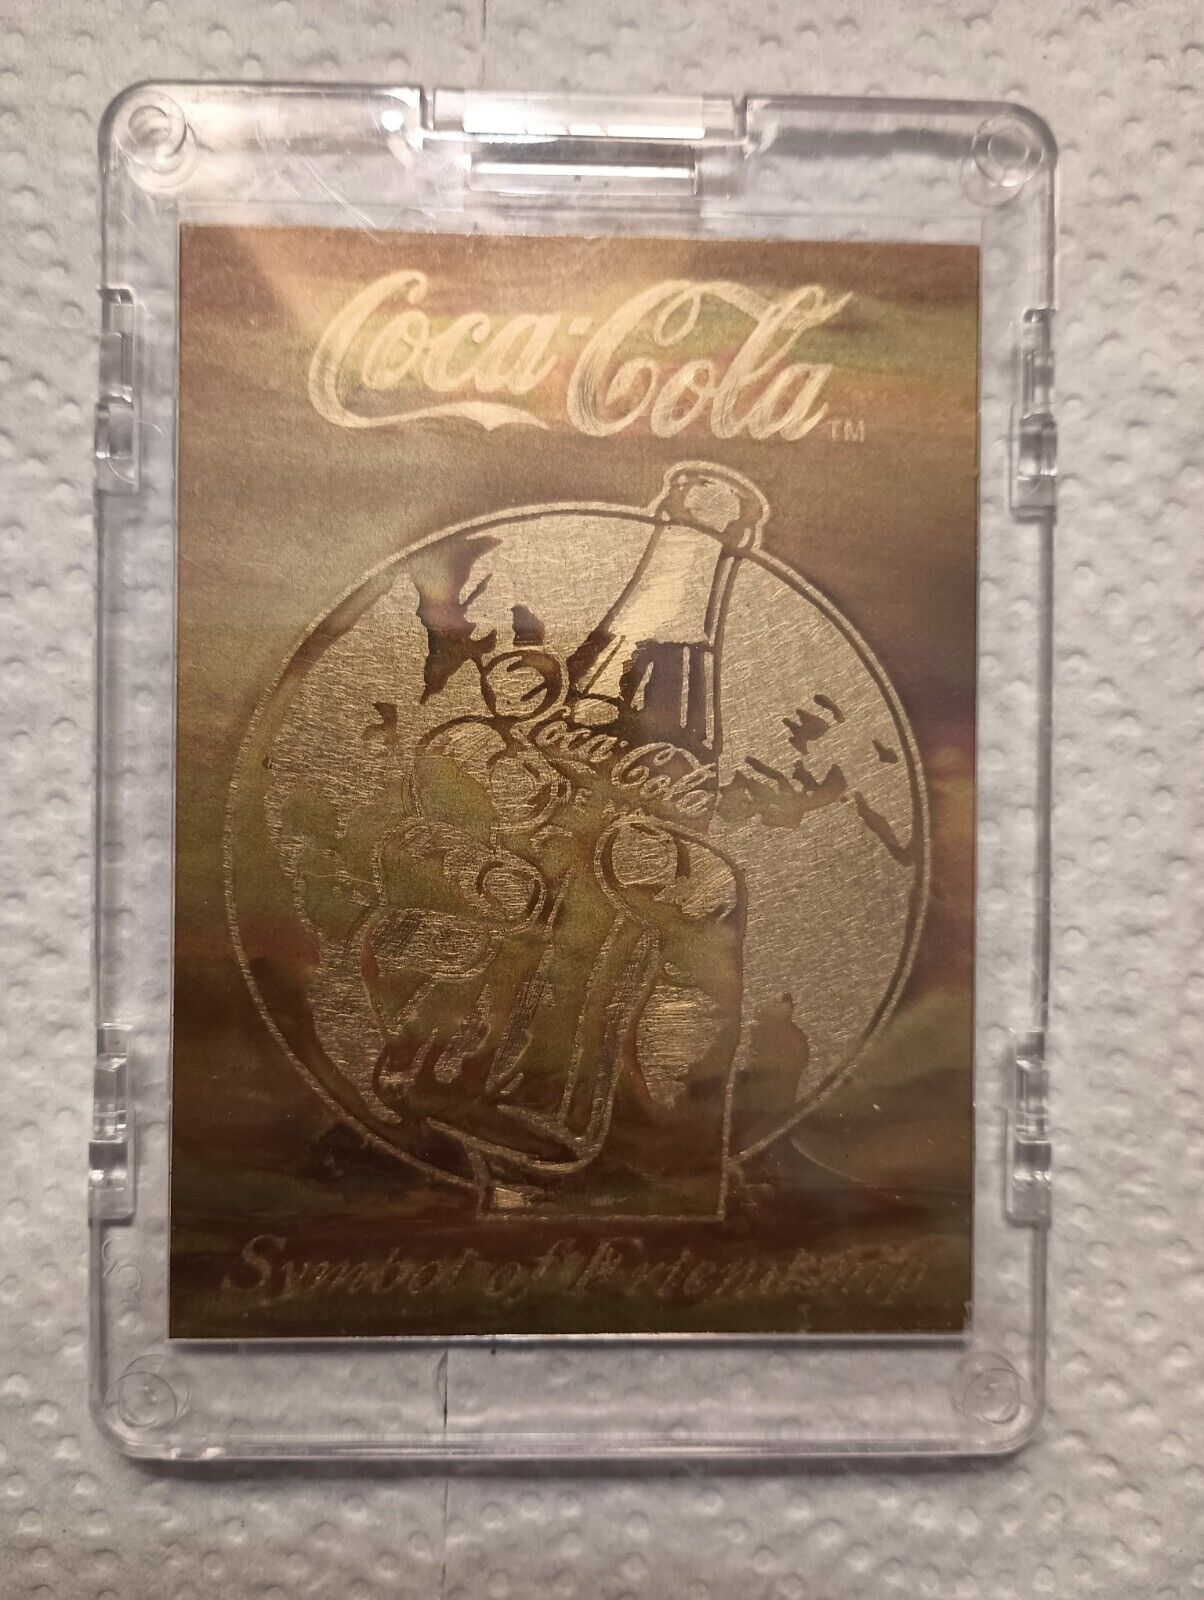 1994 COLLECT A CARD COCA COLA COLLECTION BE-1 METAL SPECIAL INSERT CARD 